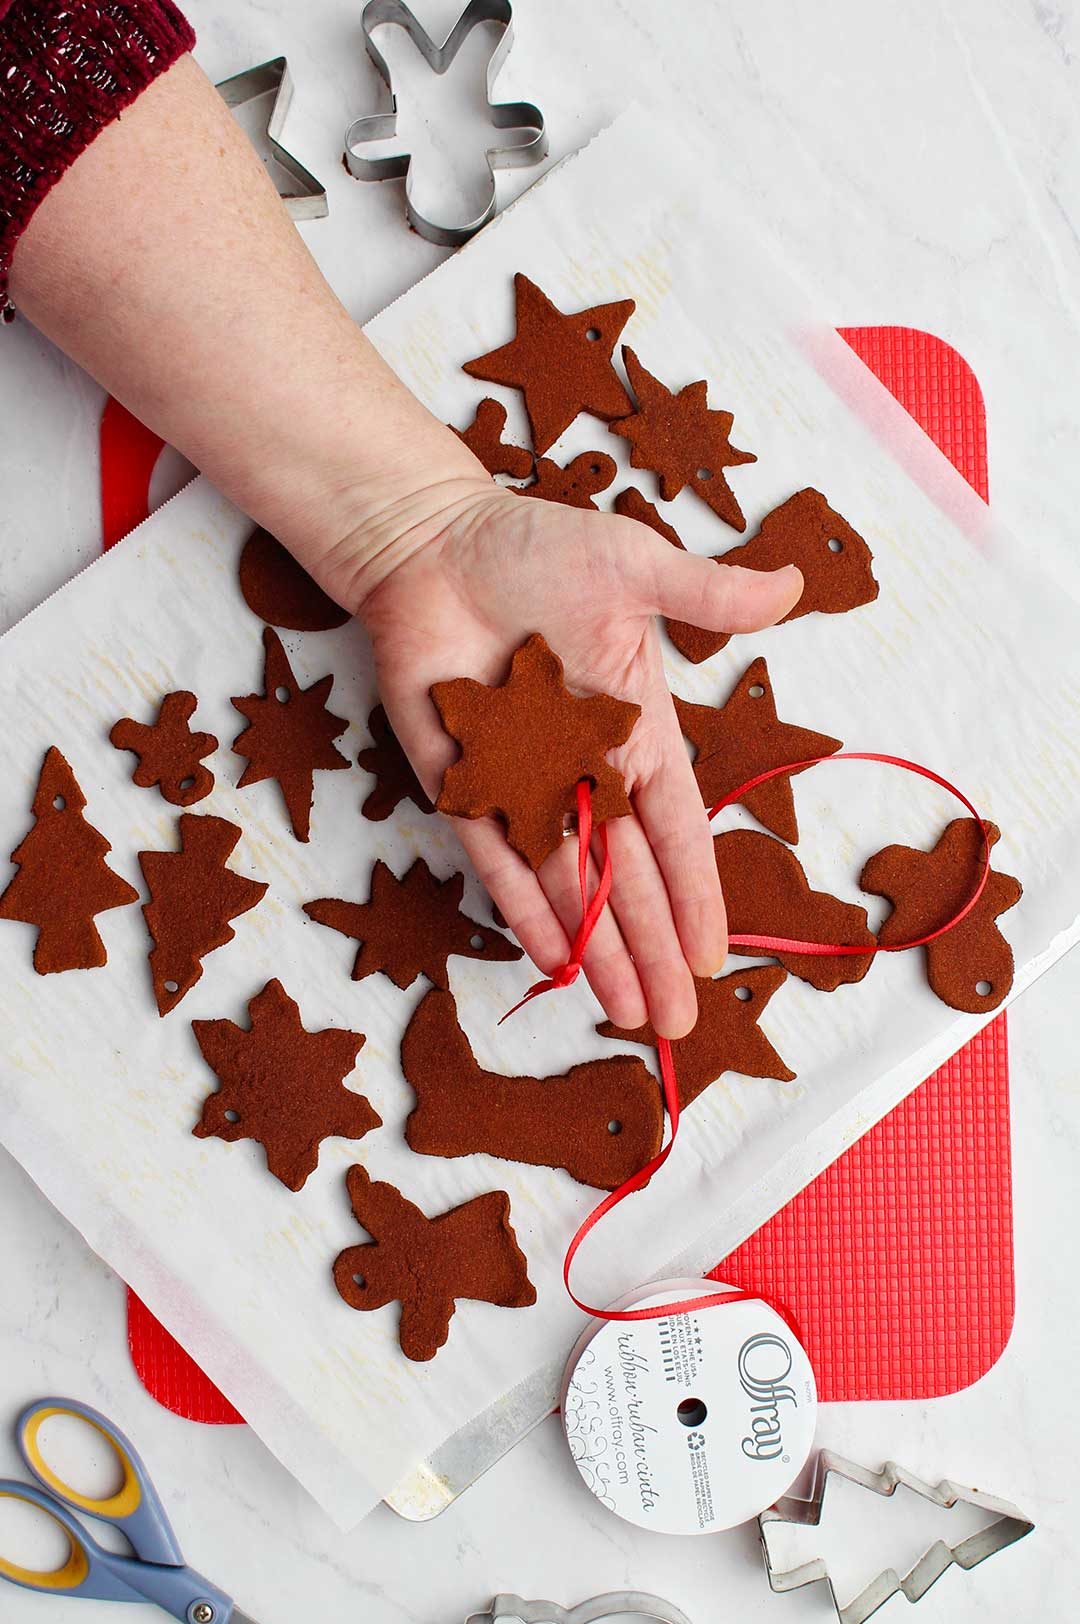 Hand holding a baked snowflake ornament with red ribbon for hanging with other ornaments on cookie sheet.